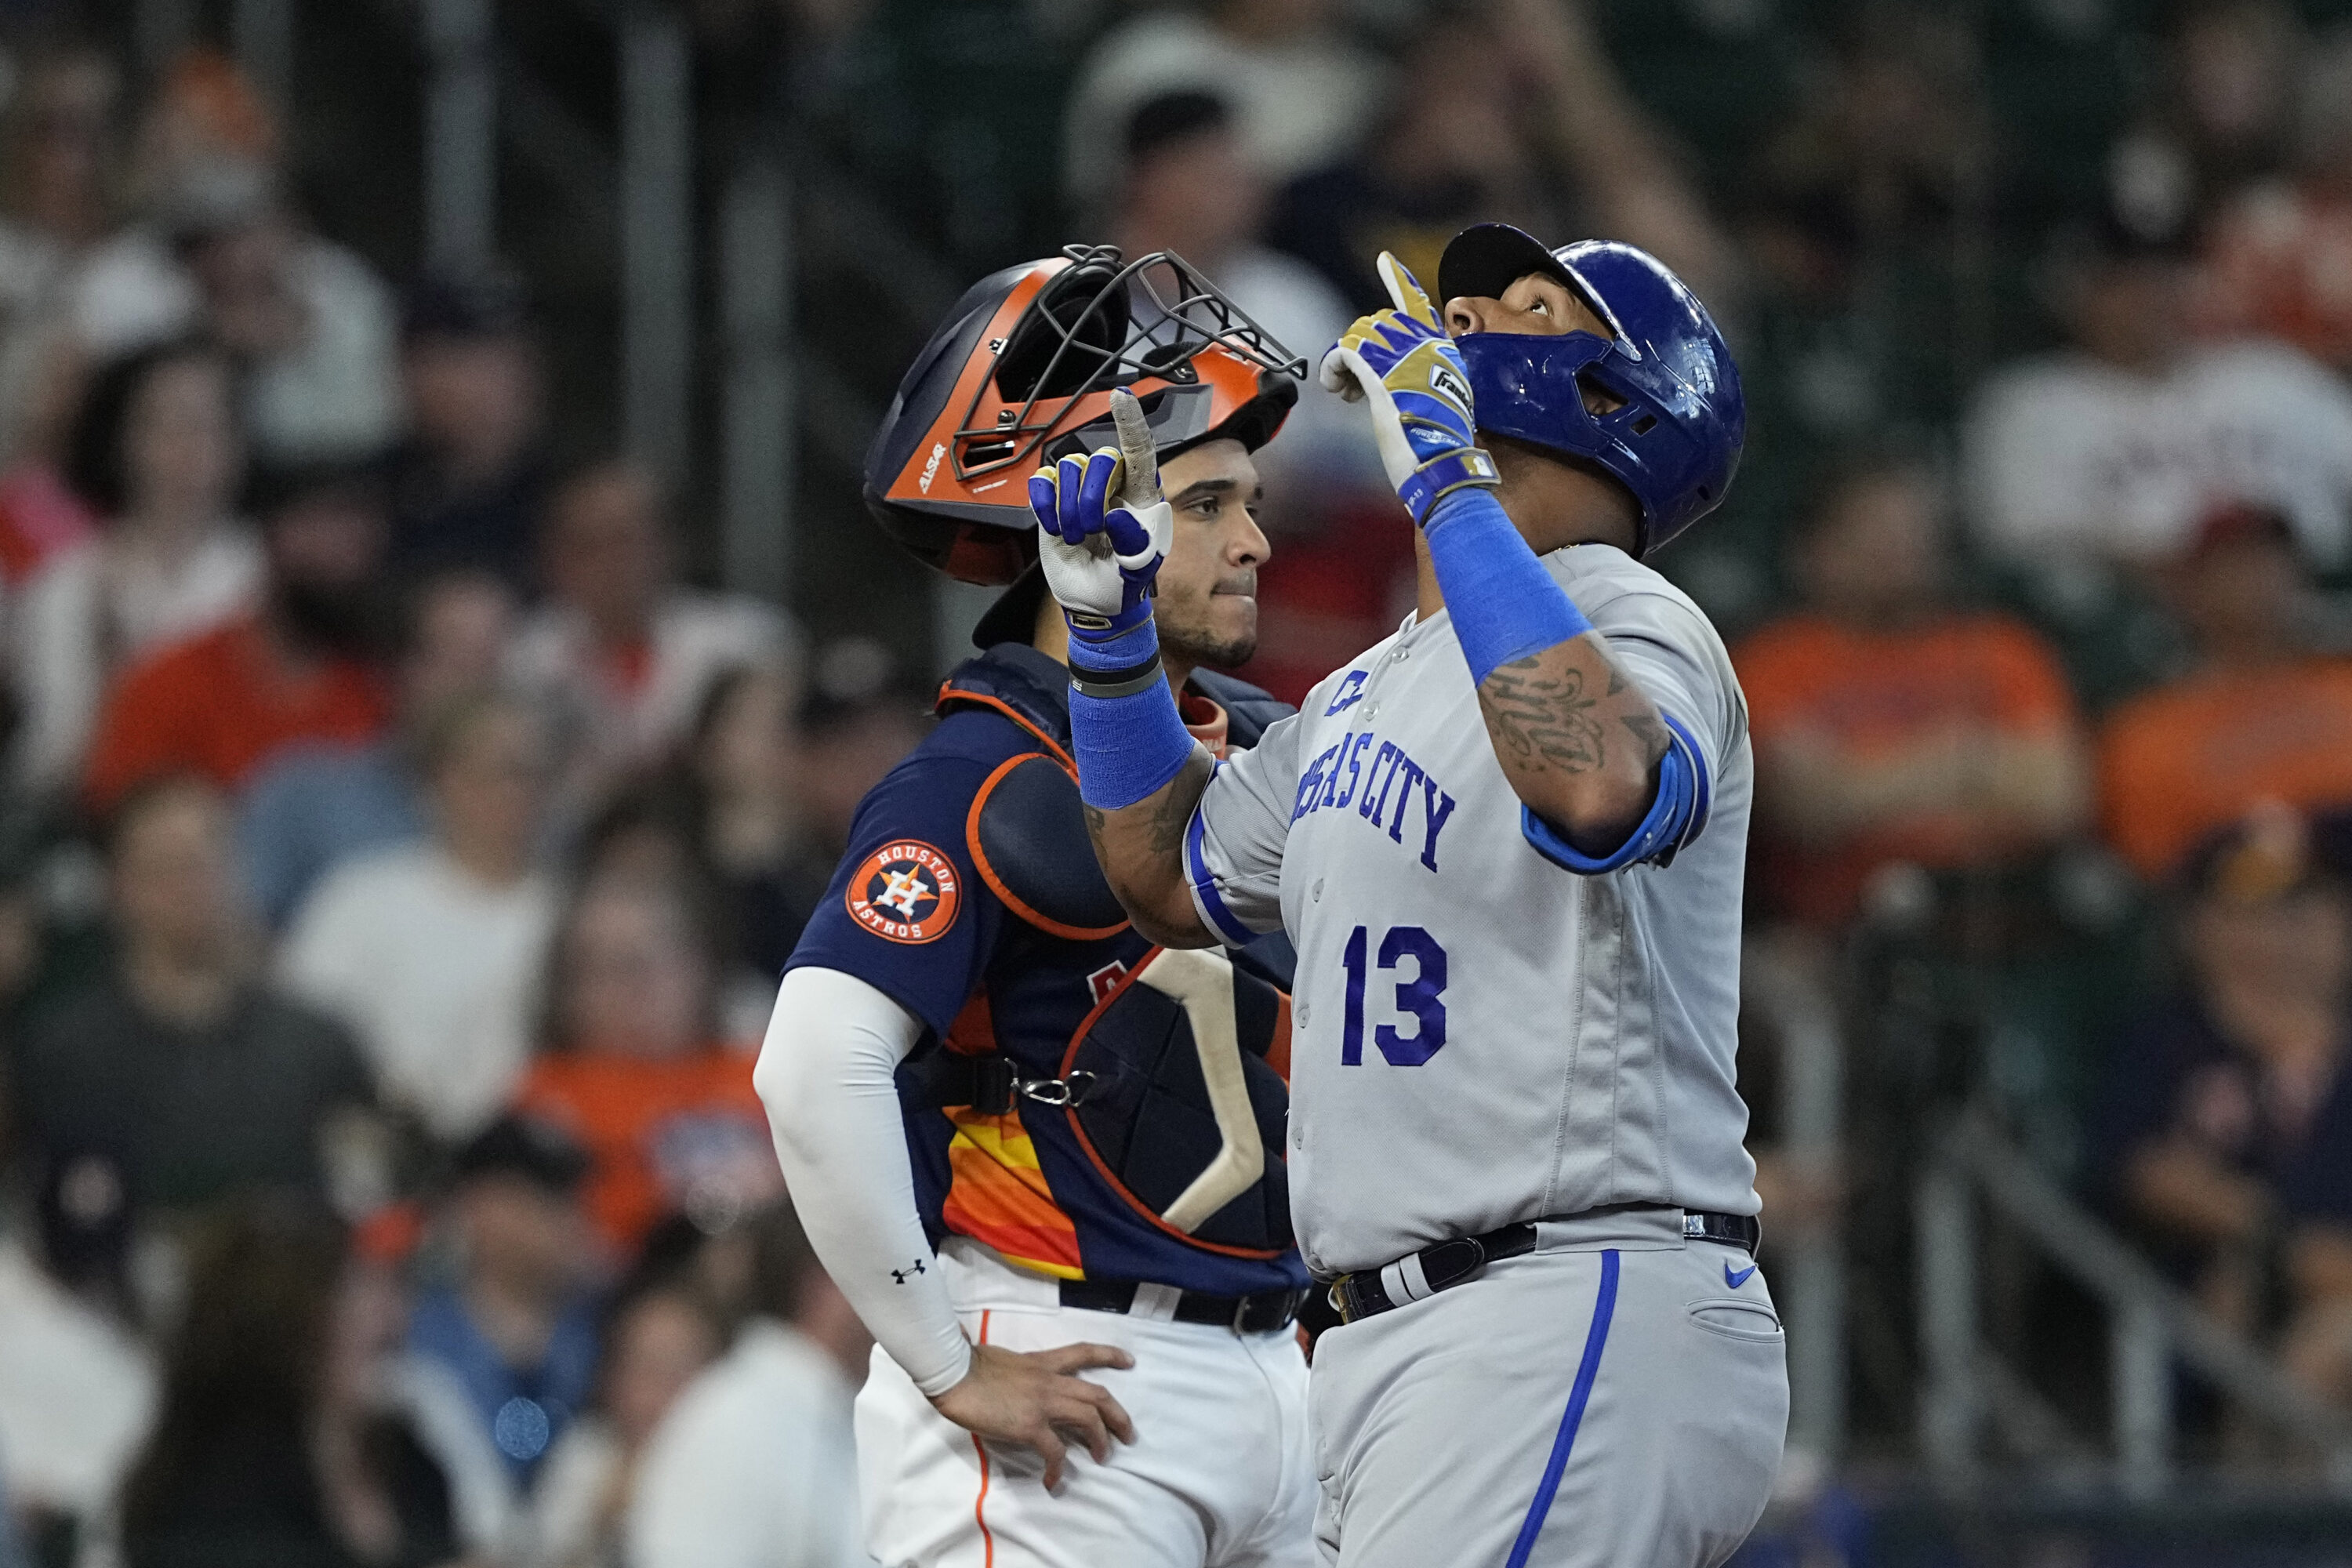 Astros slump continues with sweep by Royals; Houston clinging to final wild card spot